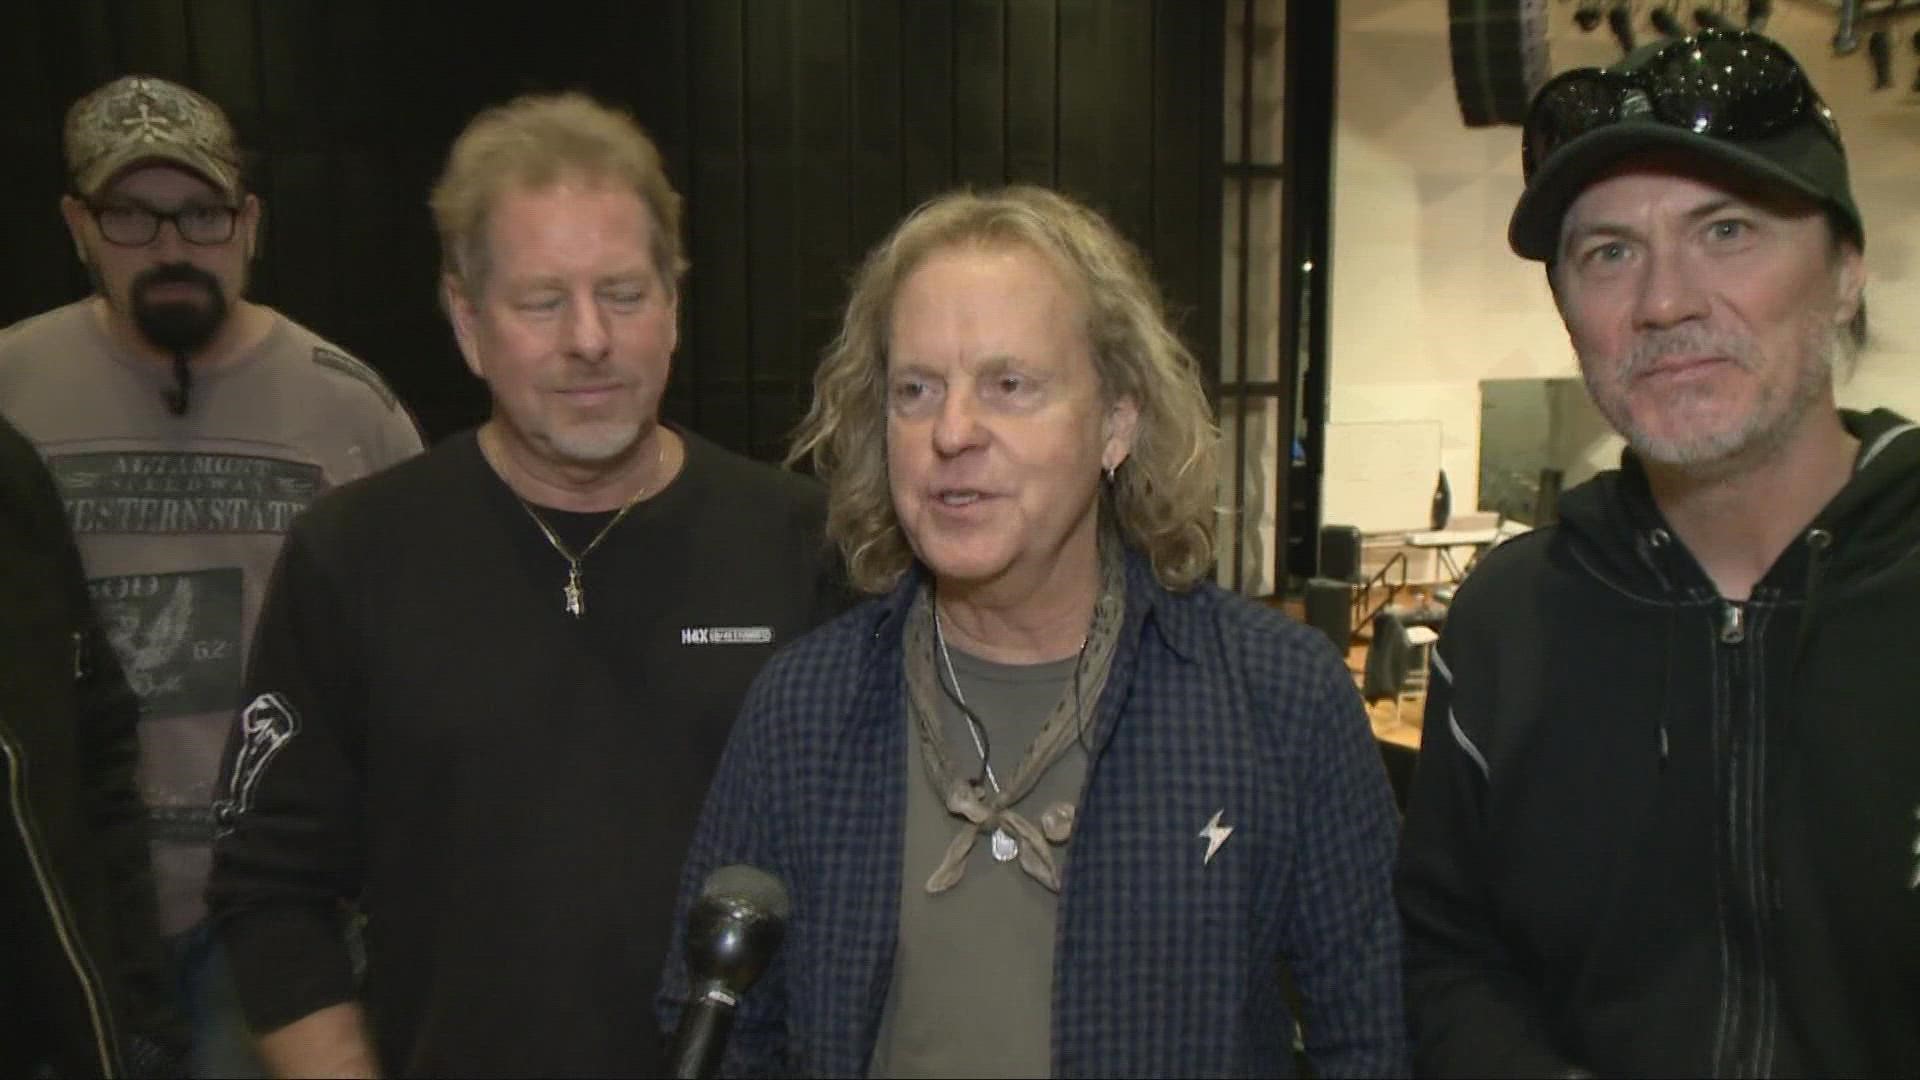 Lead singer Jack Blades talked about what fans can expect from their first-ever live concert with an orchestra.